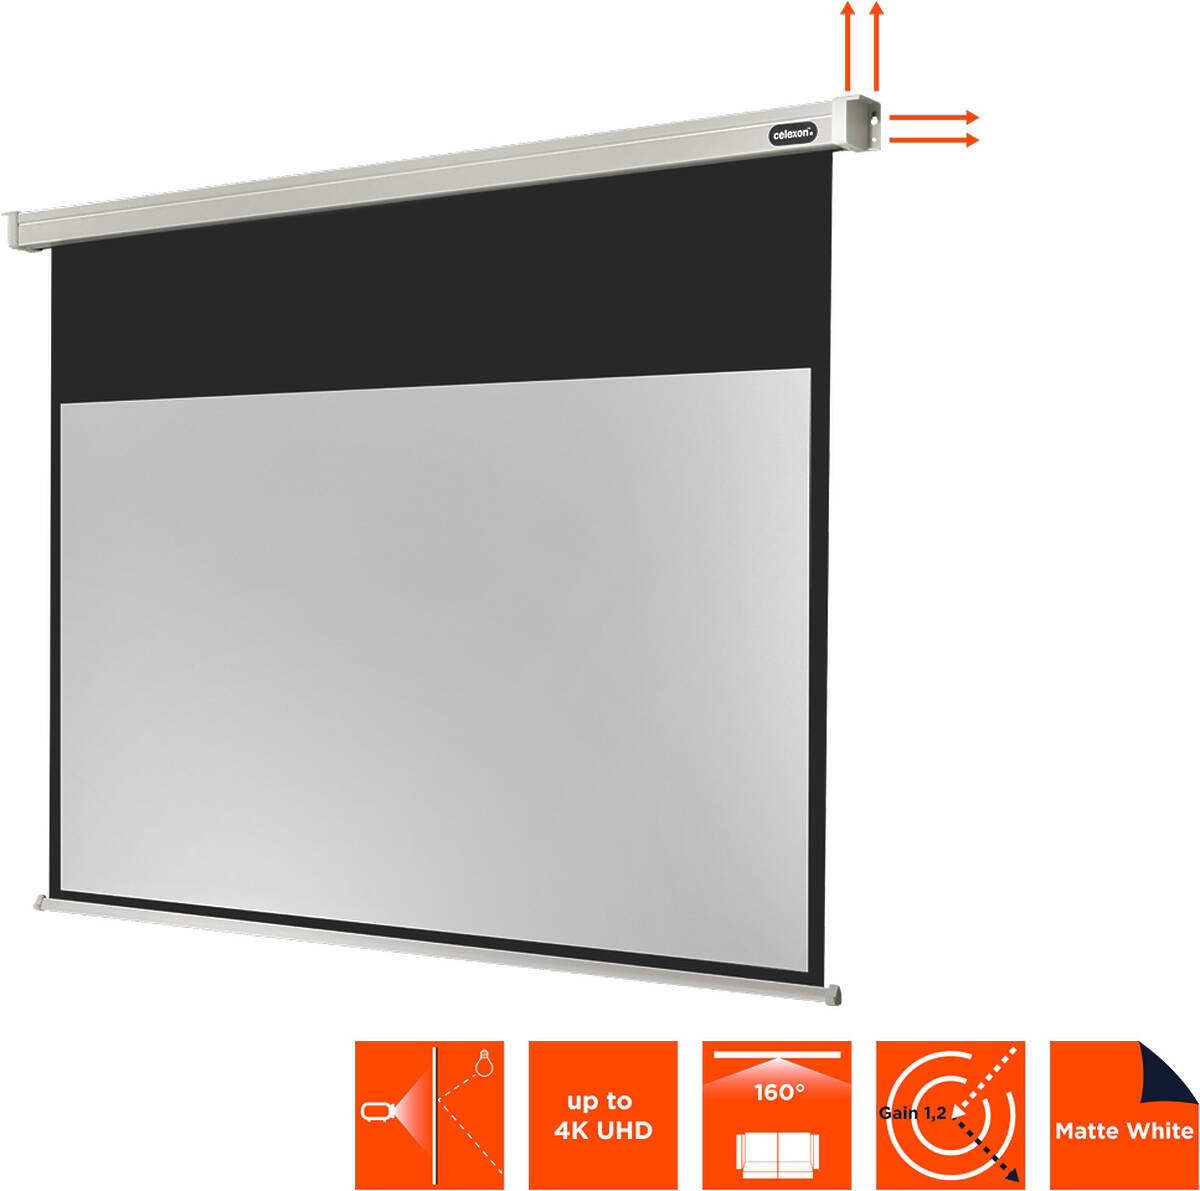 Celexon EP/230X169 104" (2.64m)
 16:9 aspect ratio projection screen product image. Click to enlarge.